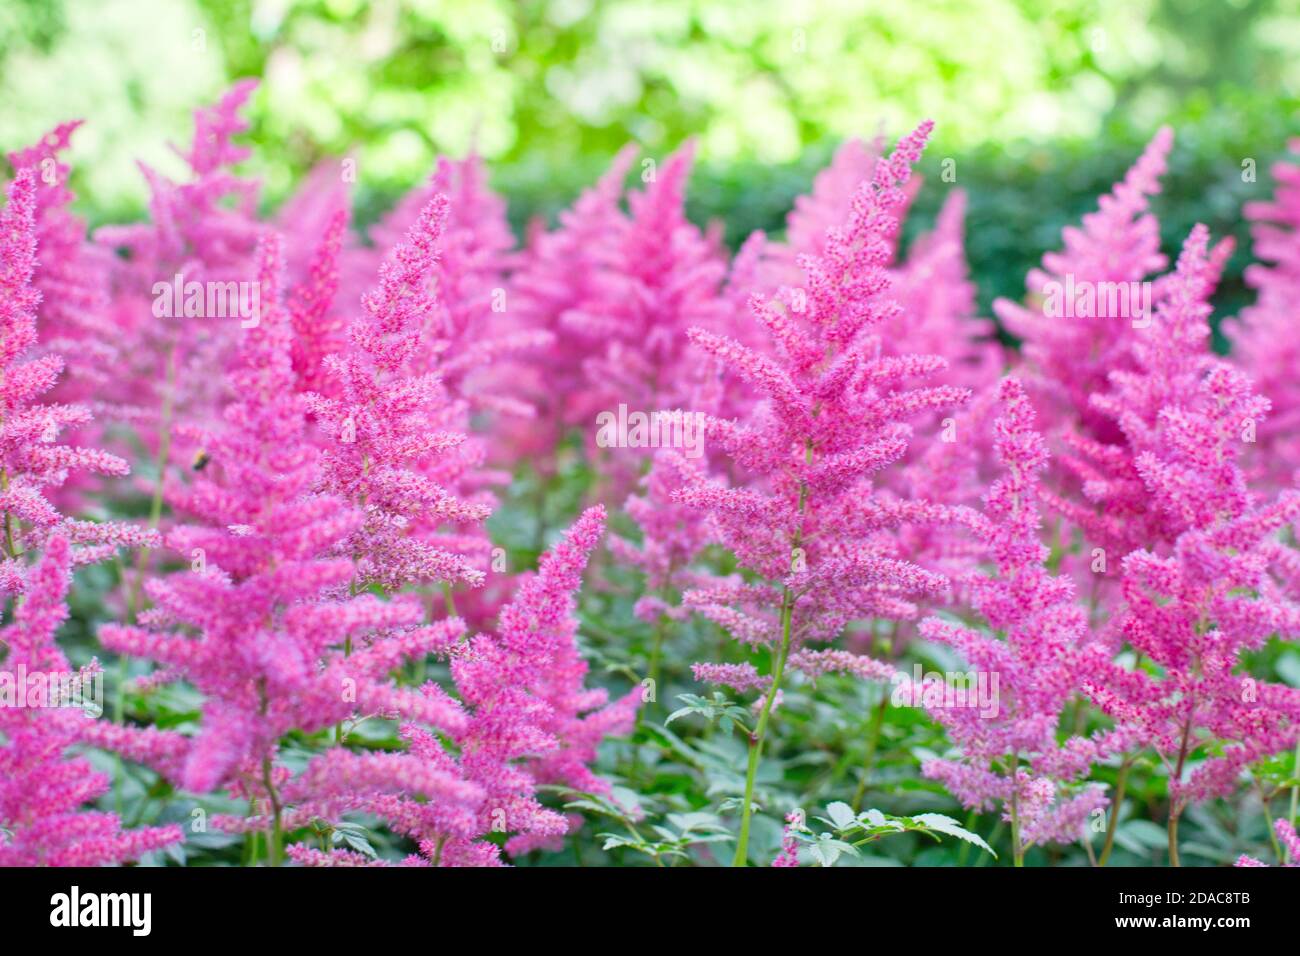 Astilbe plant (also called false goat's beard and false spirea) with pink feathery plumes of flowers growing in the garden Stock Photo